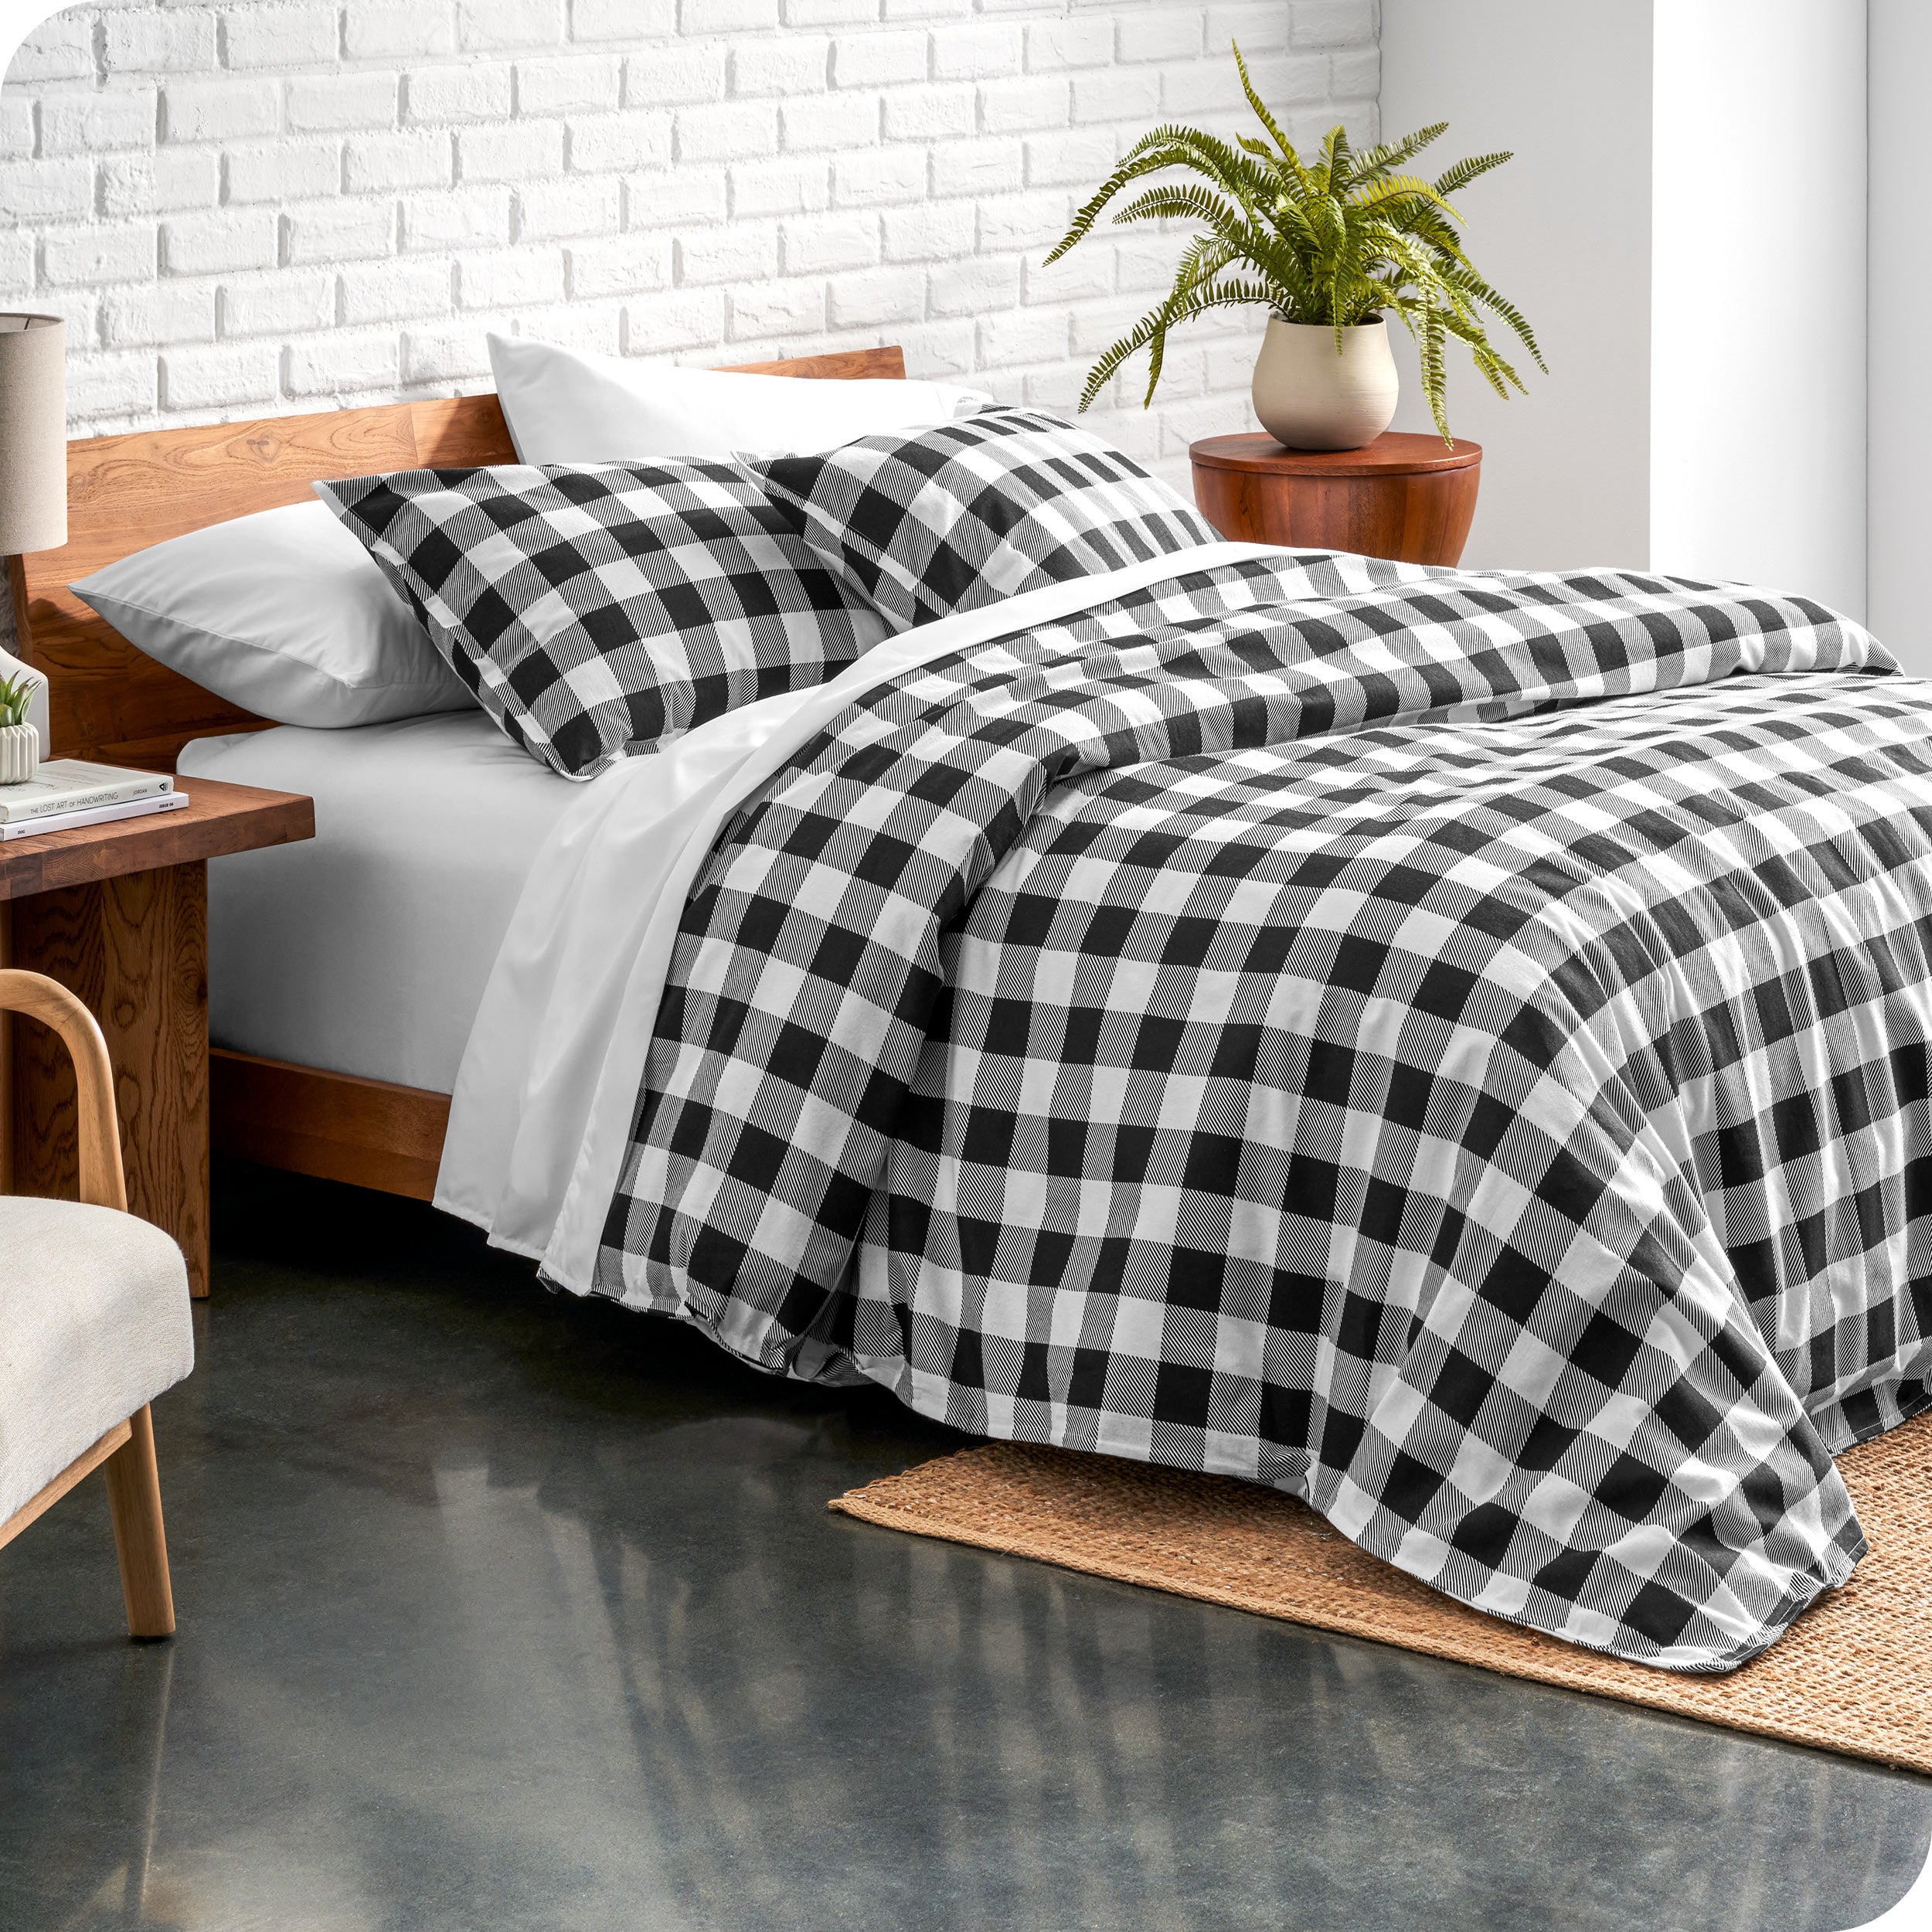 Print duvet cover and shams laid out on a bed